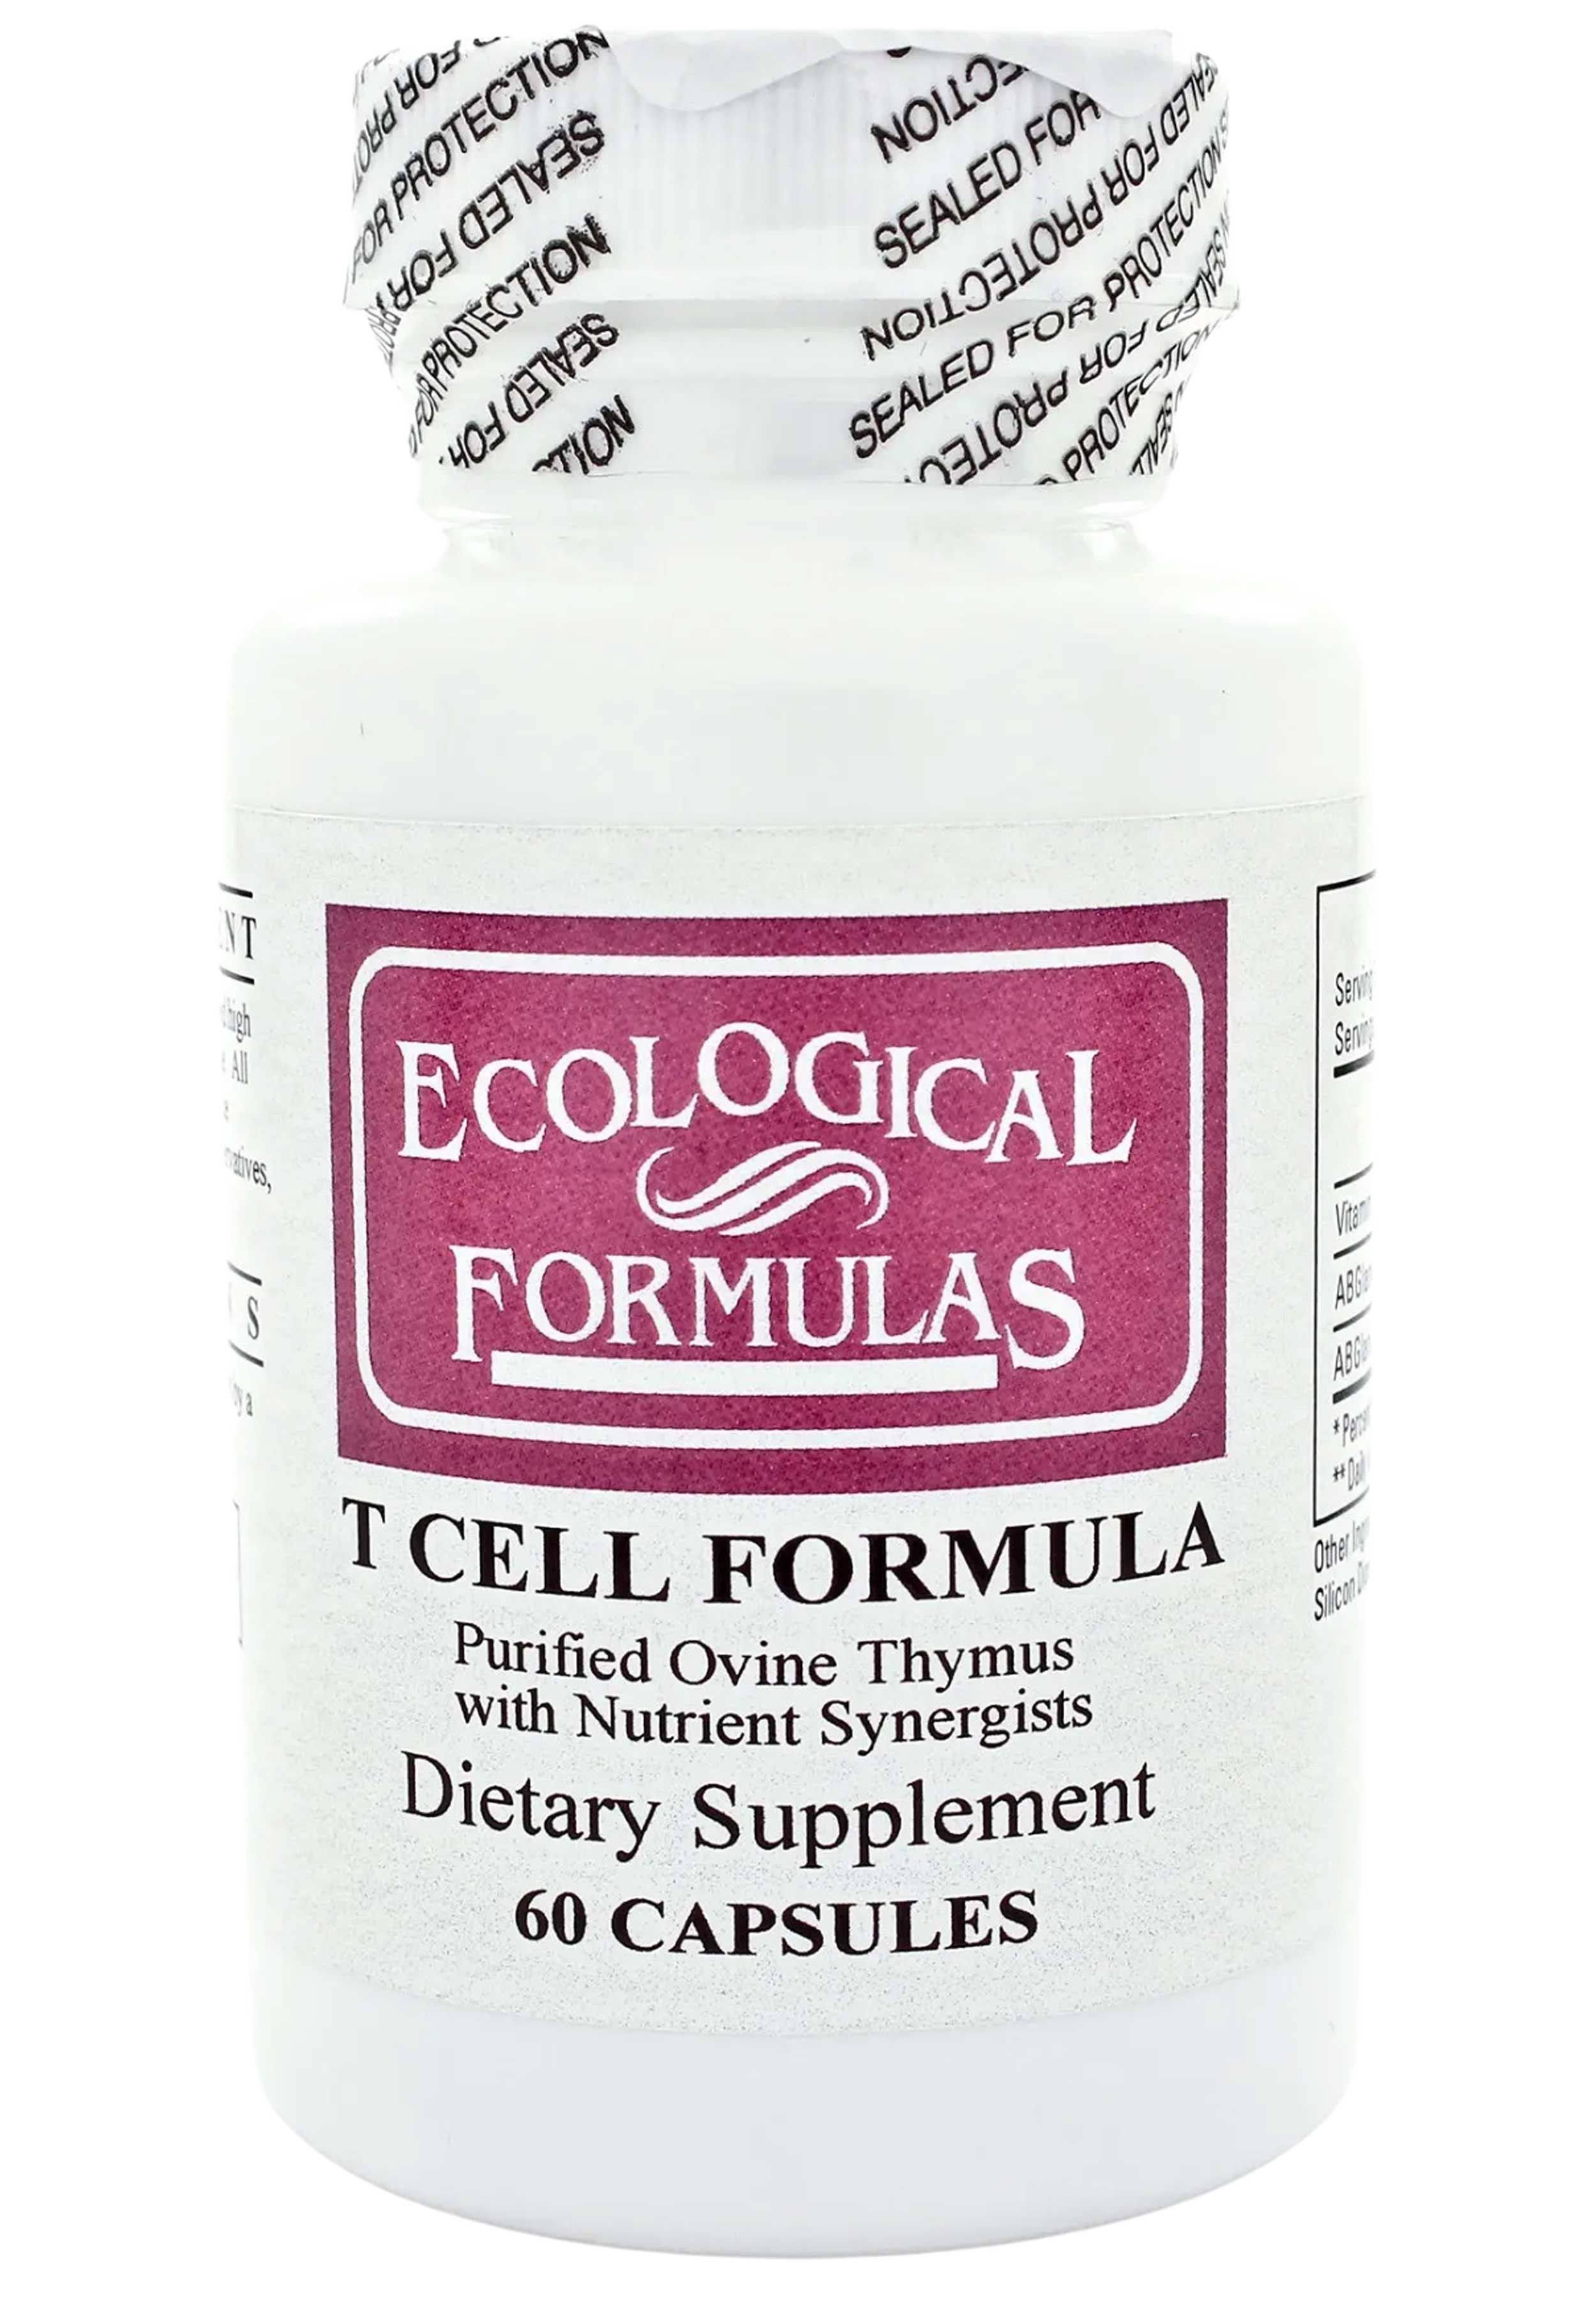 Ecological Formulas/Cardiovascular Research T Cell Formula